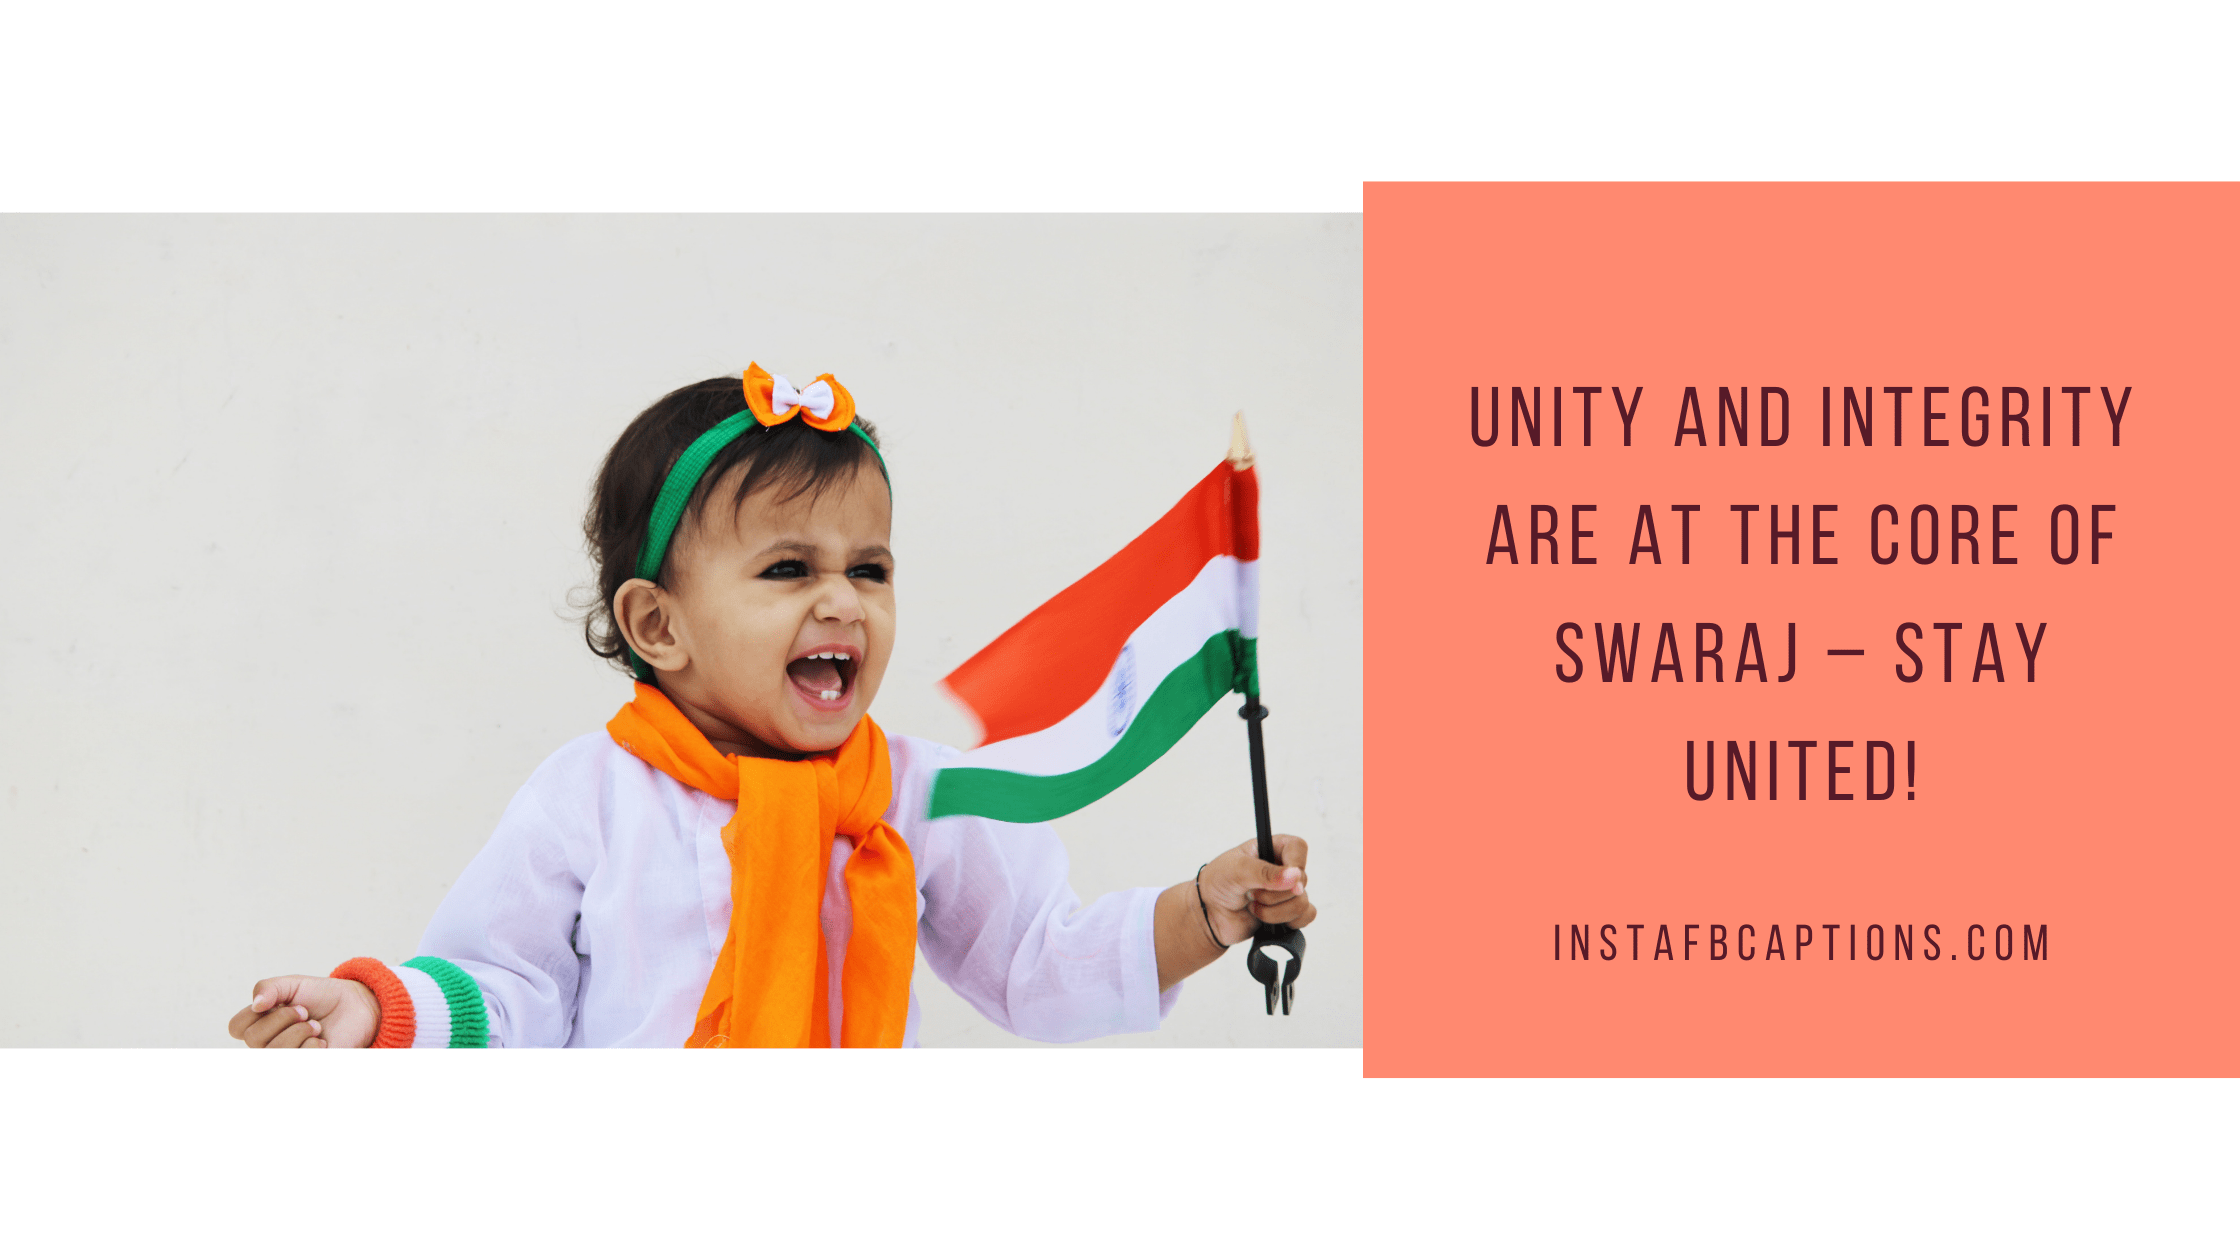 Unity and integrity are at the core of Swaraj – Stay united! republic day captions for instagram - Republic Day Captions for Instagram 1 - 100+ Republic Day Instagram Captions And Quotes 2022